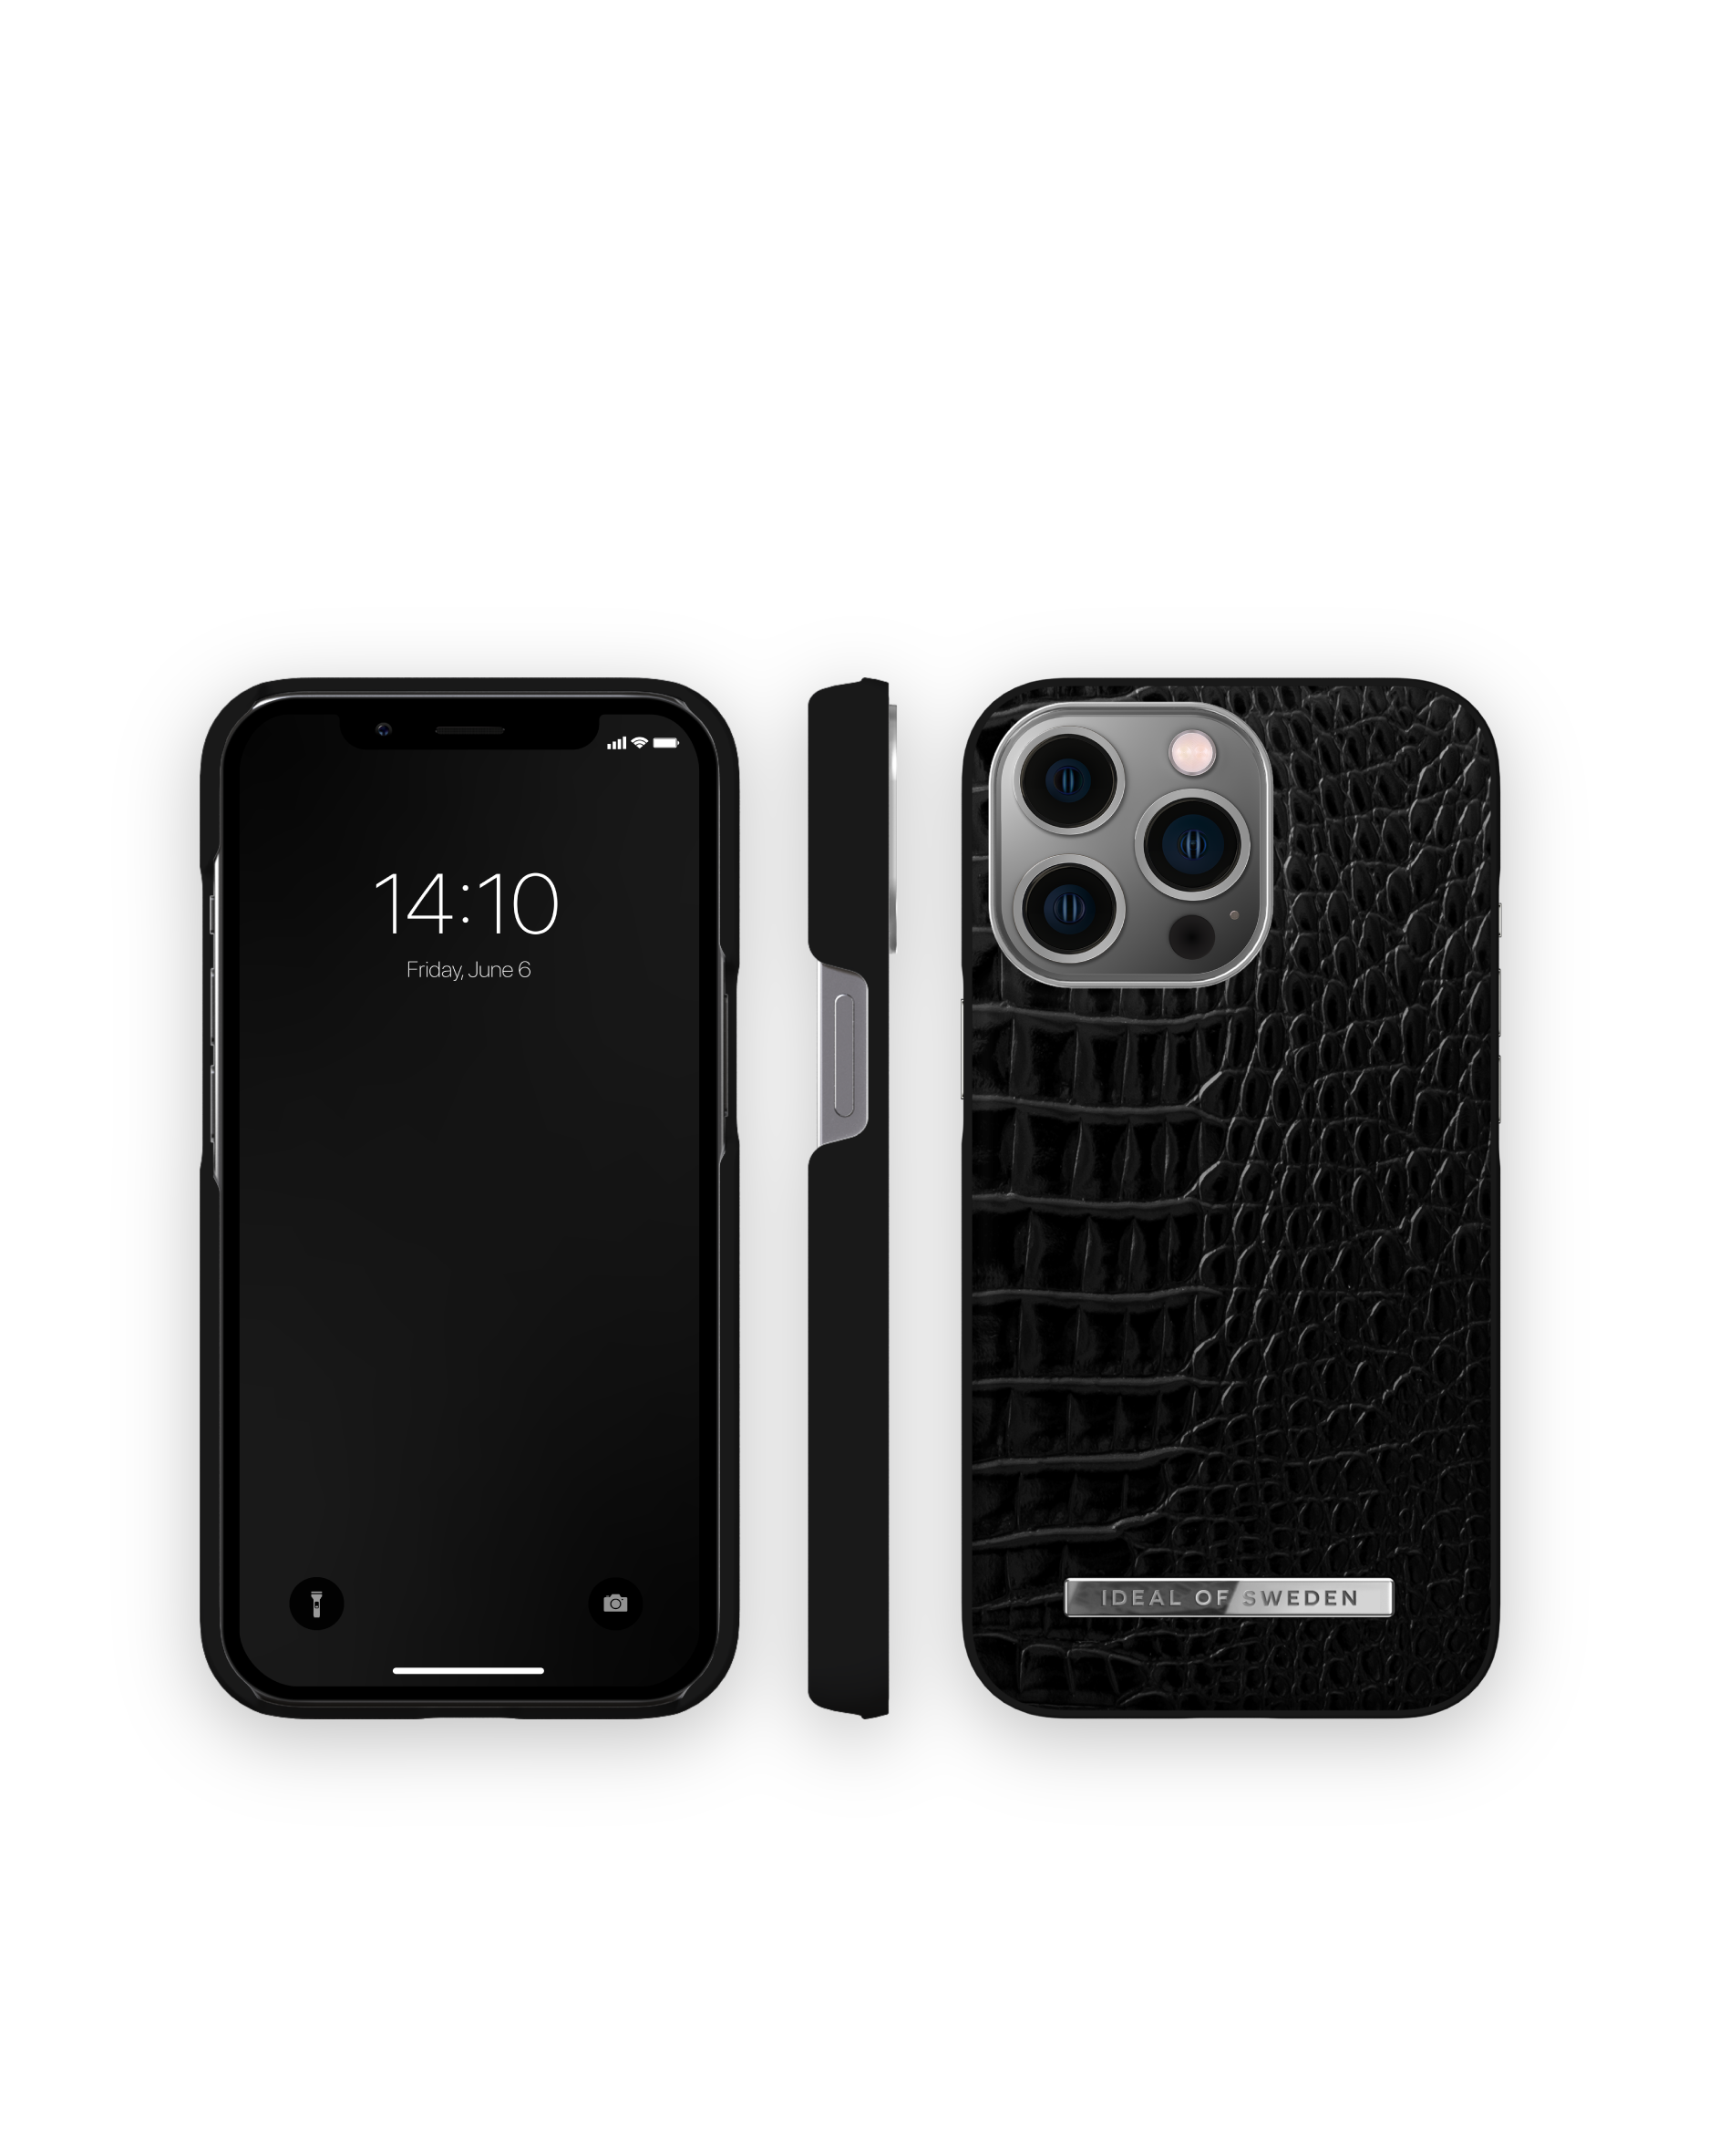 Neo - Recycled Silver IDACSS22-I2161P-306, Pro, 13 IDEAL iPhone SWEDEN Apple, Noir Backcover, OF Croco